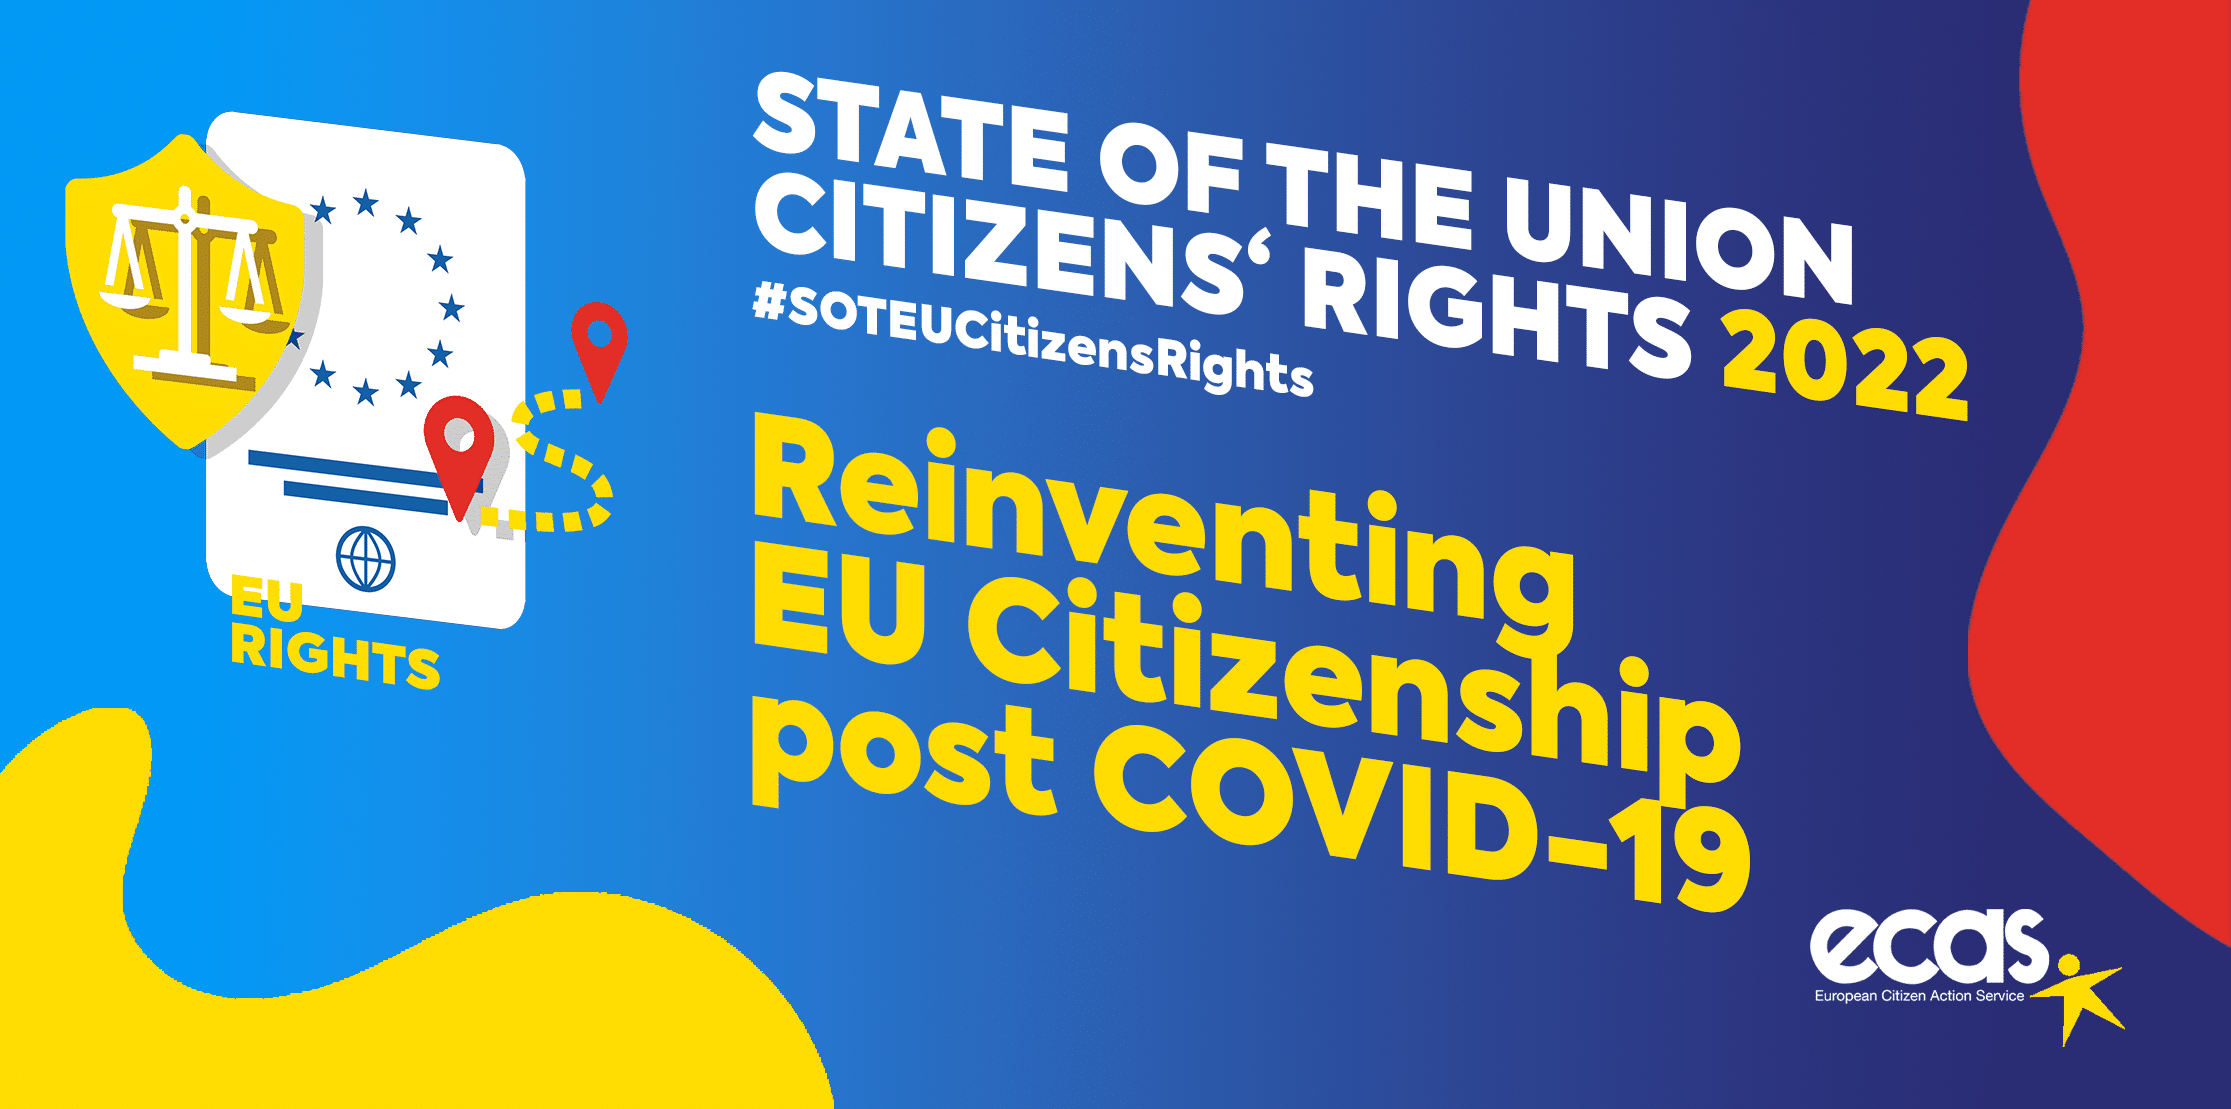 Conference Report: State of the Union Citizens Rights 2022 Conference